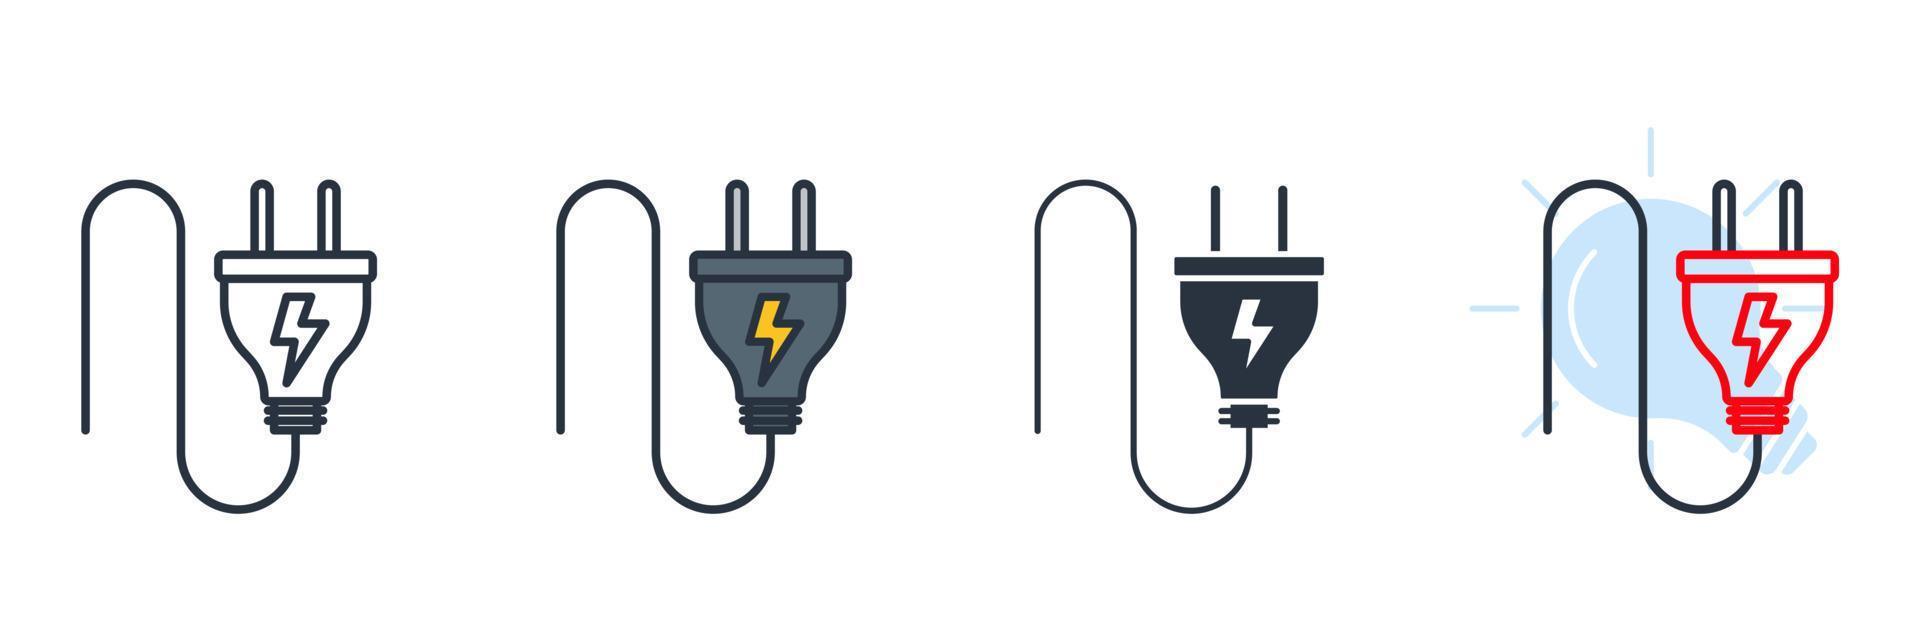 plug icon logo vector illustration. Electric plug sign symbol template for graphic and web design collection